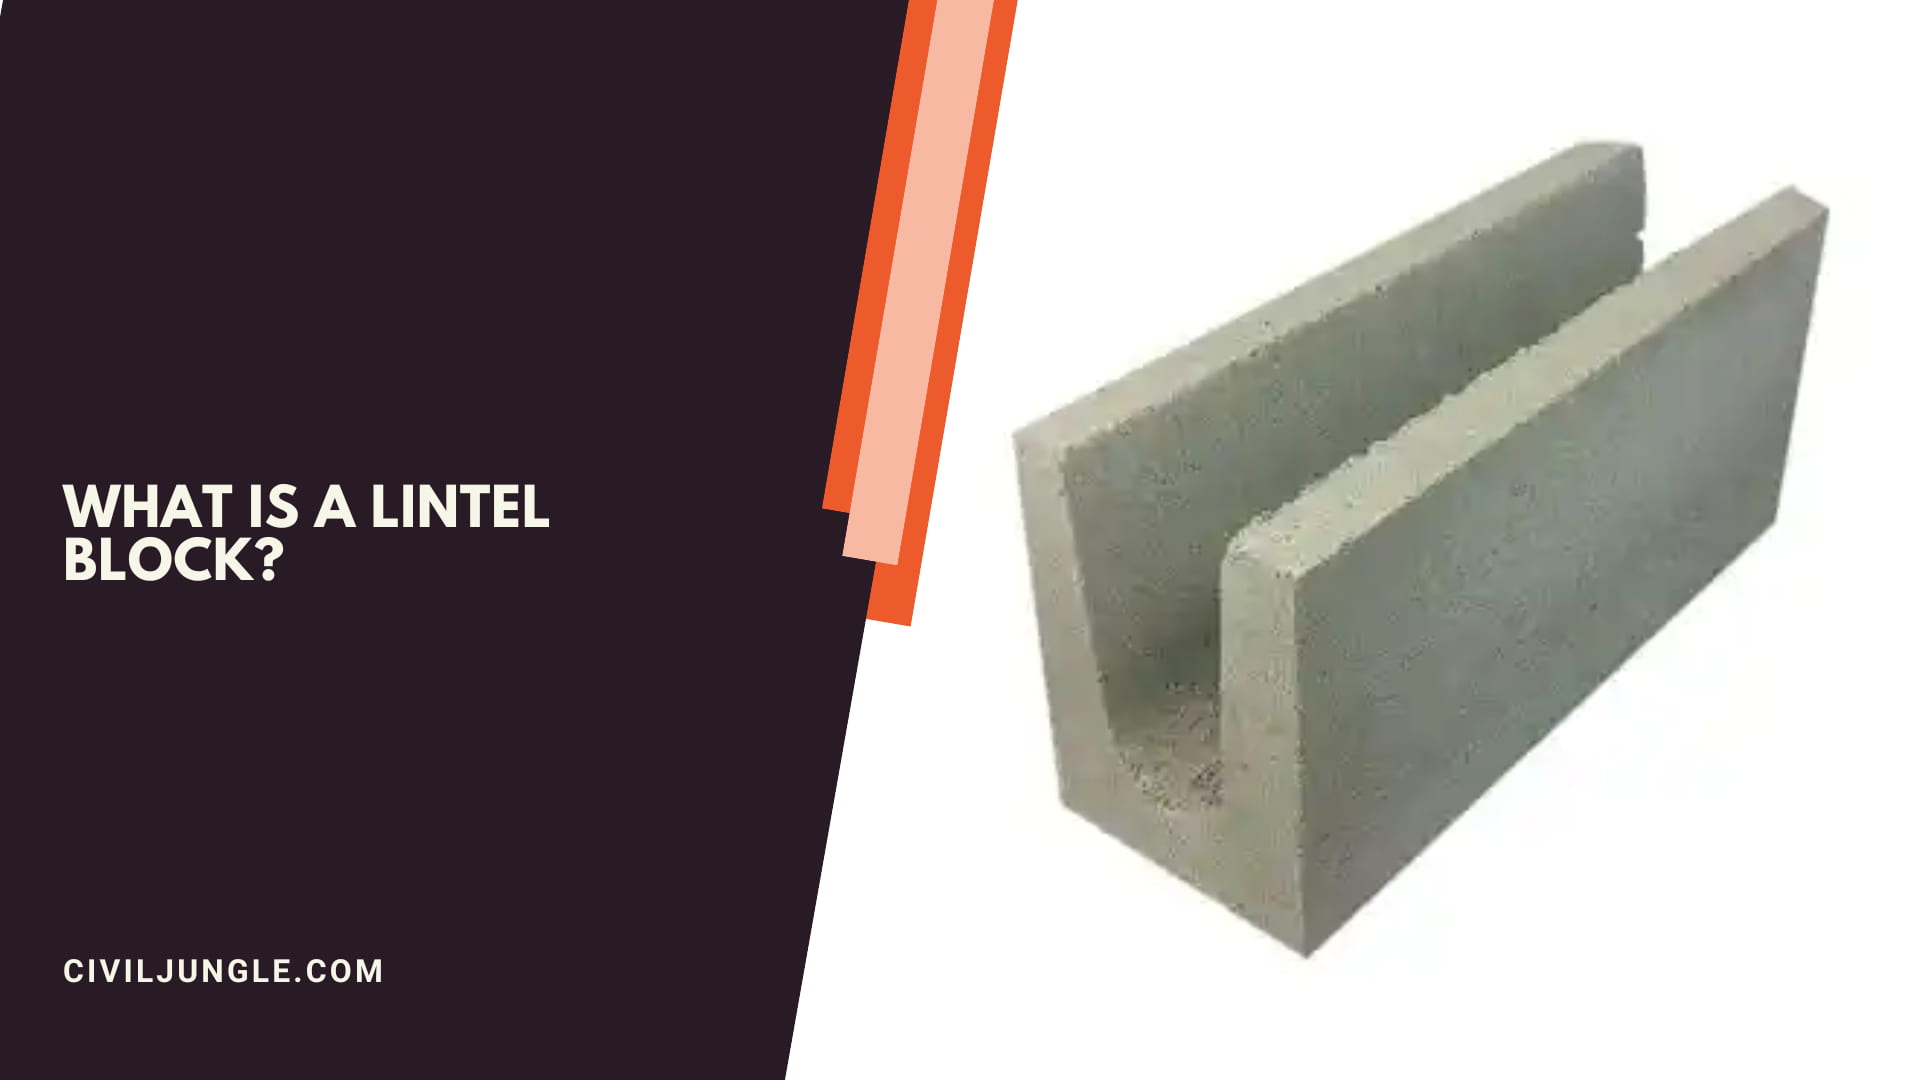 What Is a Lintel Block?